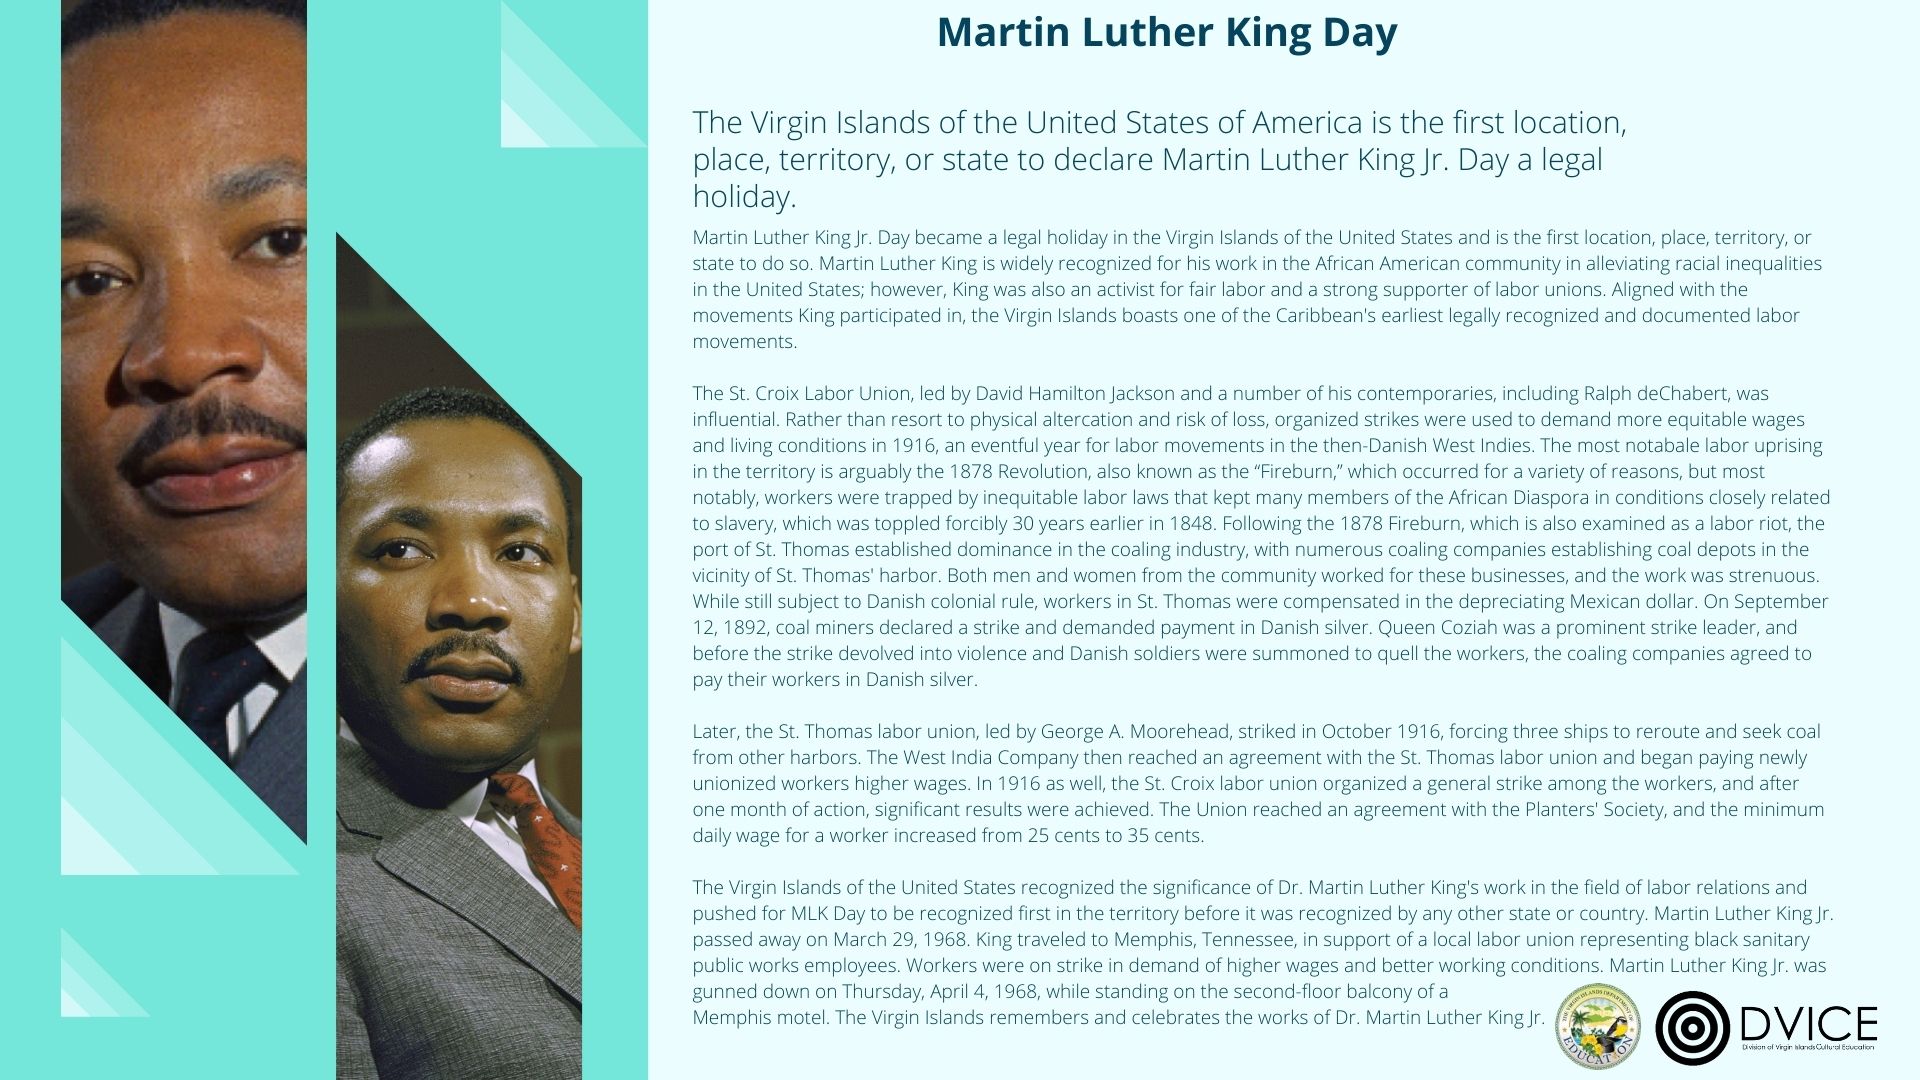 Recognize labor unions and Dr. Martin Luther King's pro-union advocacy.